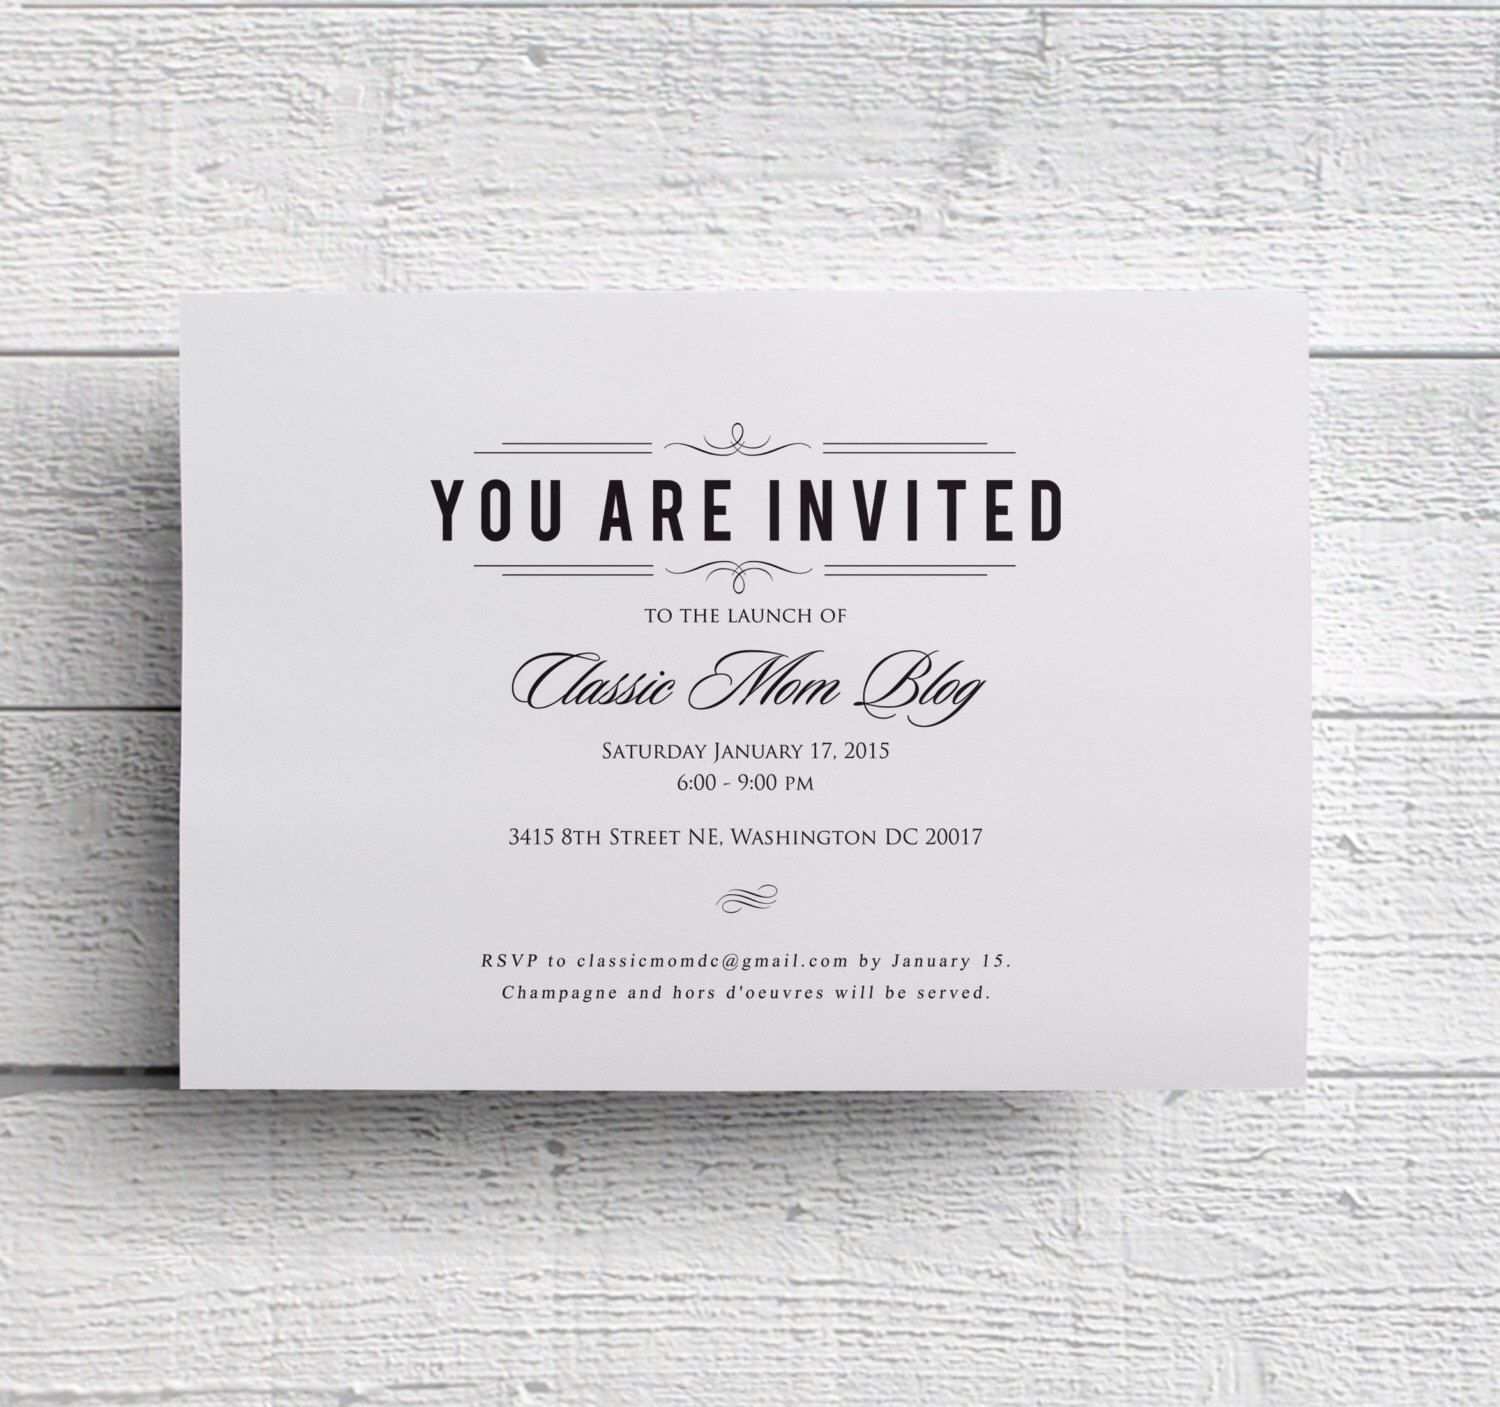 Business Dinner Invitation Examples Cards Design Templates